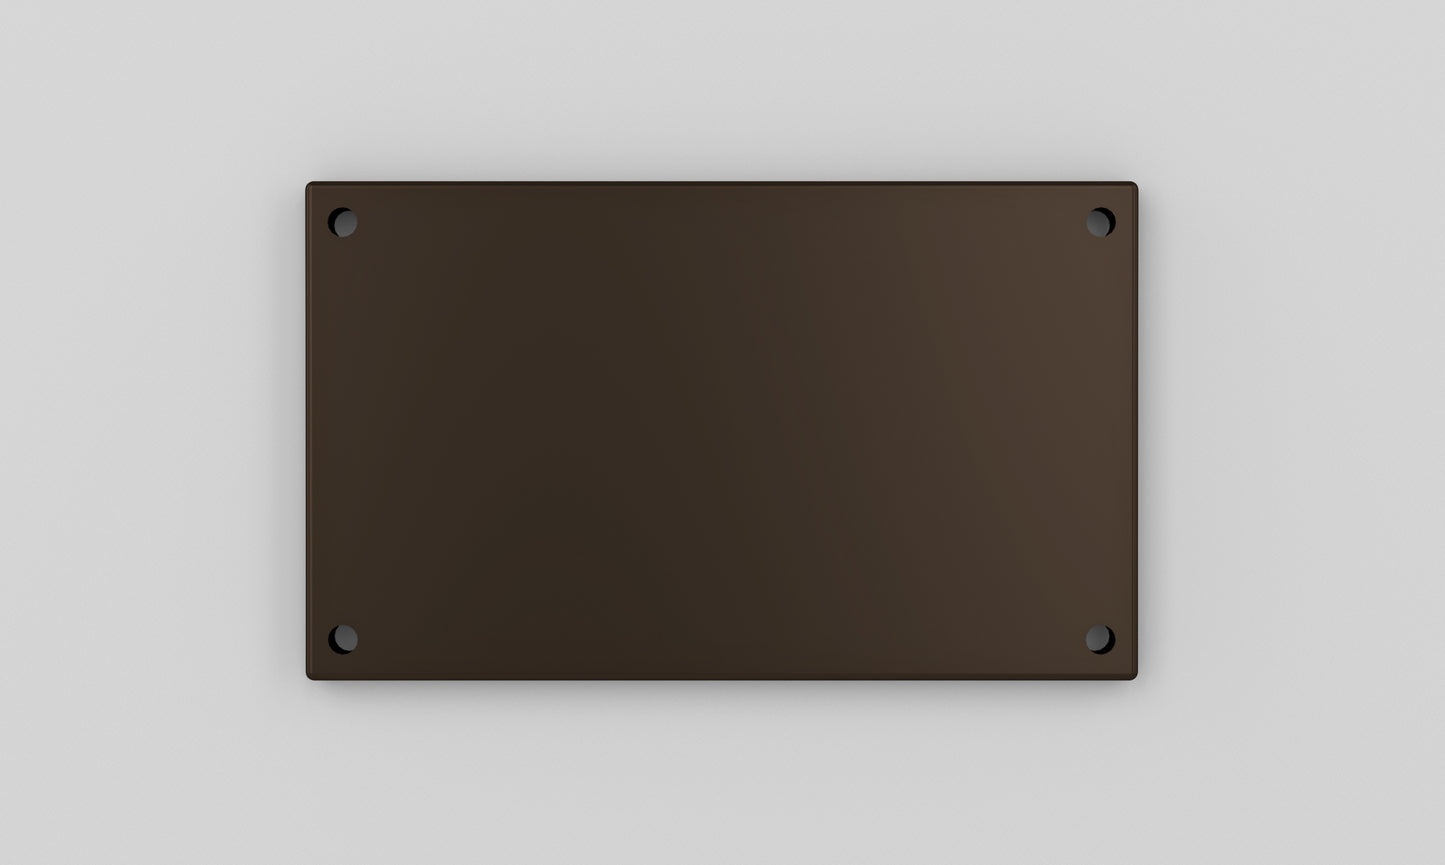 Horizontal Mounting Plate 5" Inch Size For Use With 5" Characters  (Bronze, Charcoal Grey, Off White)